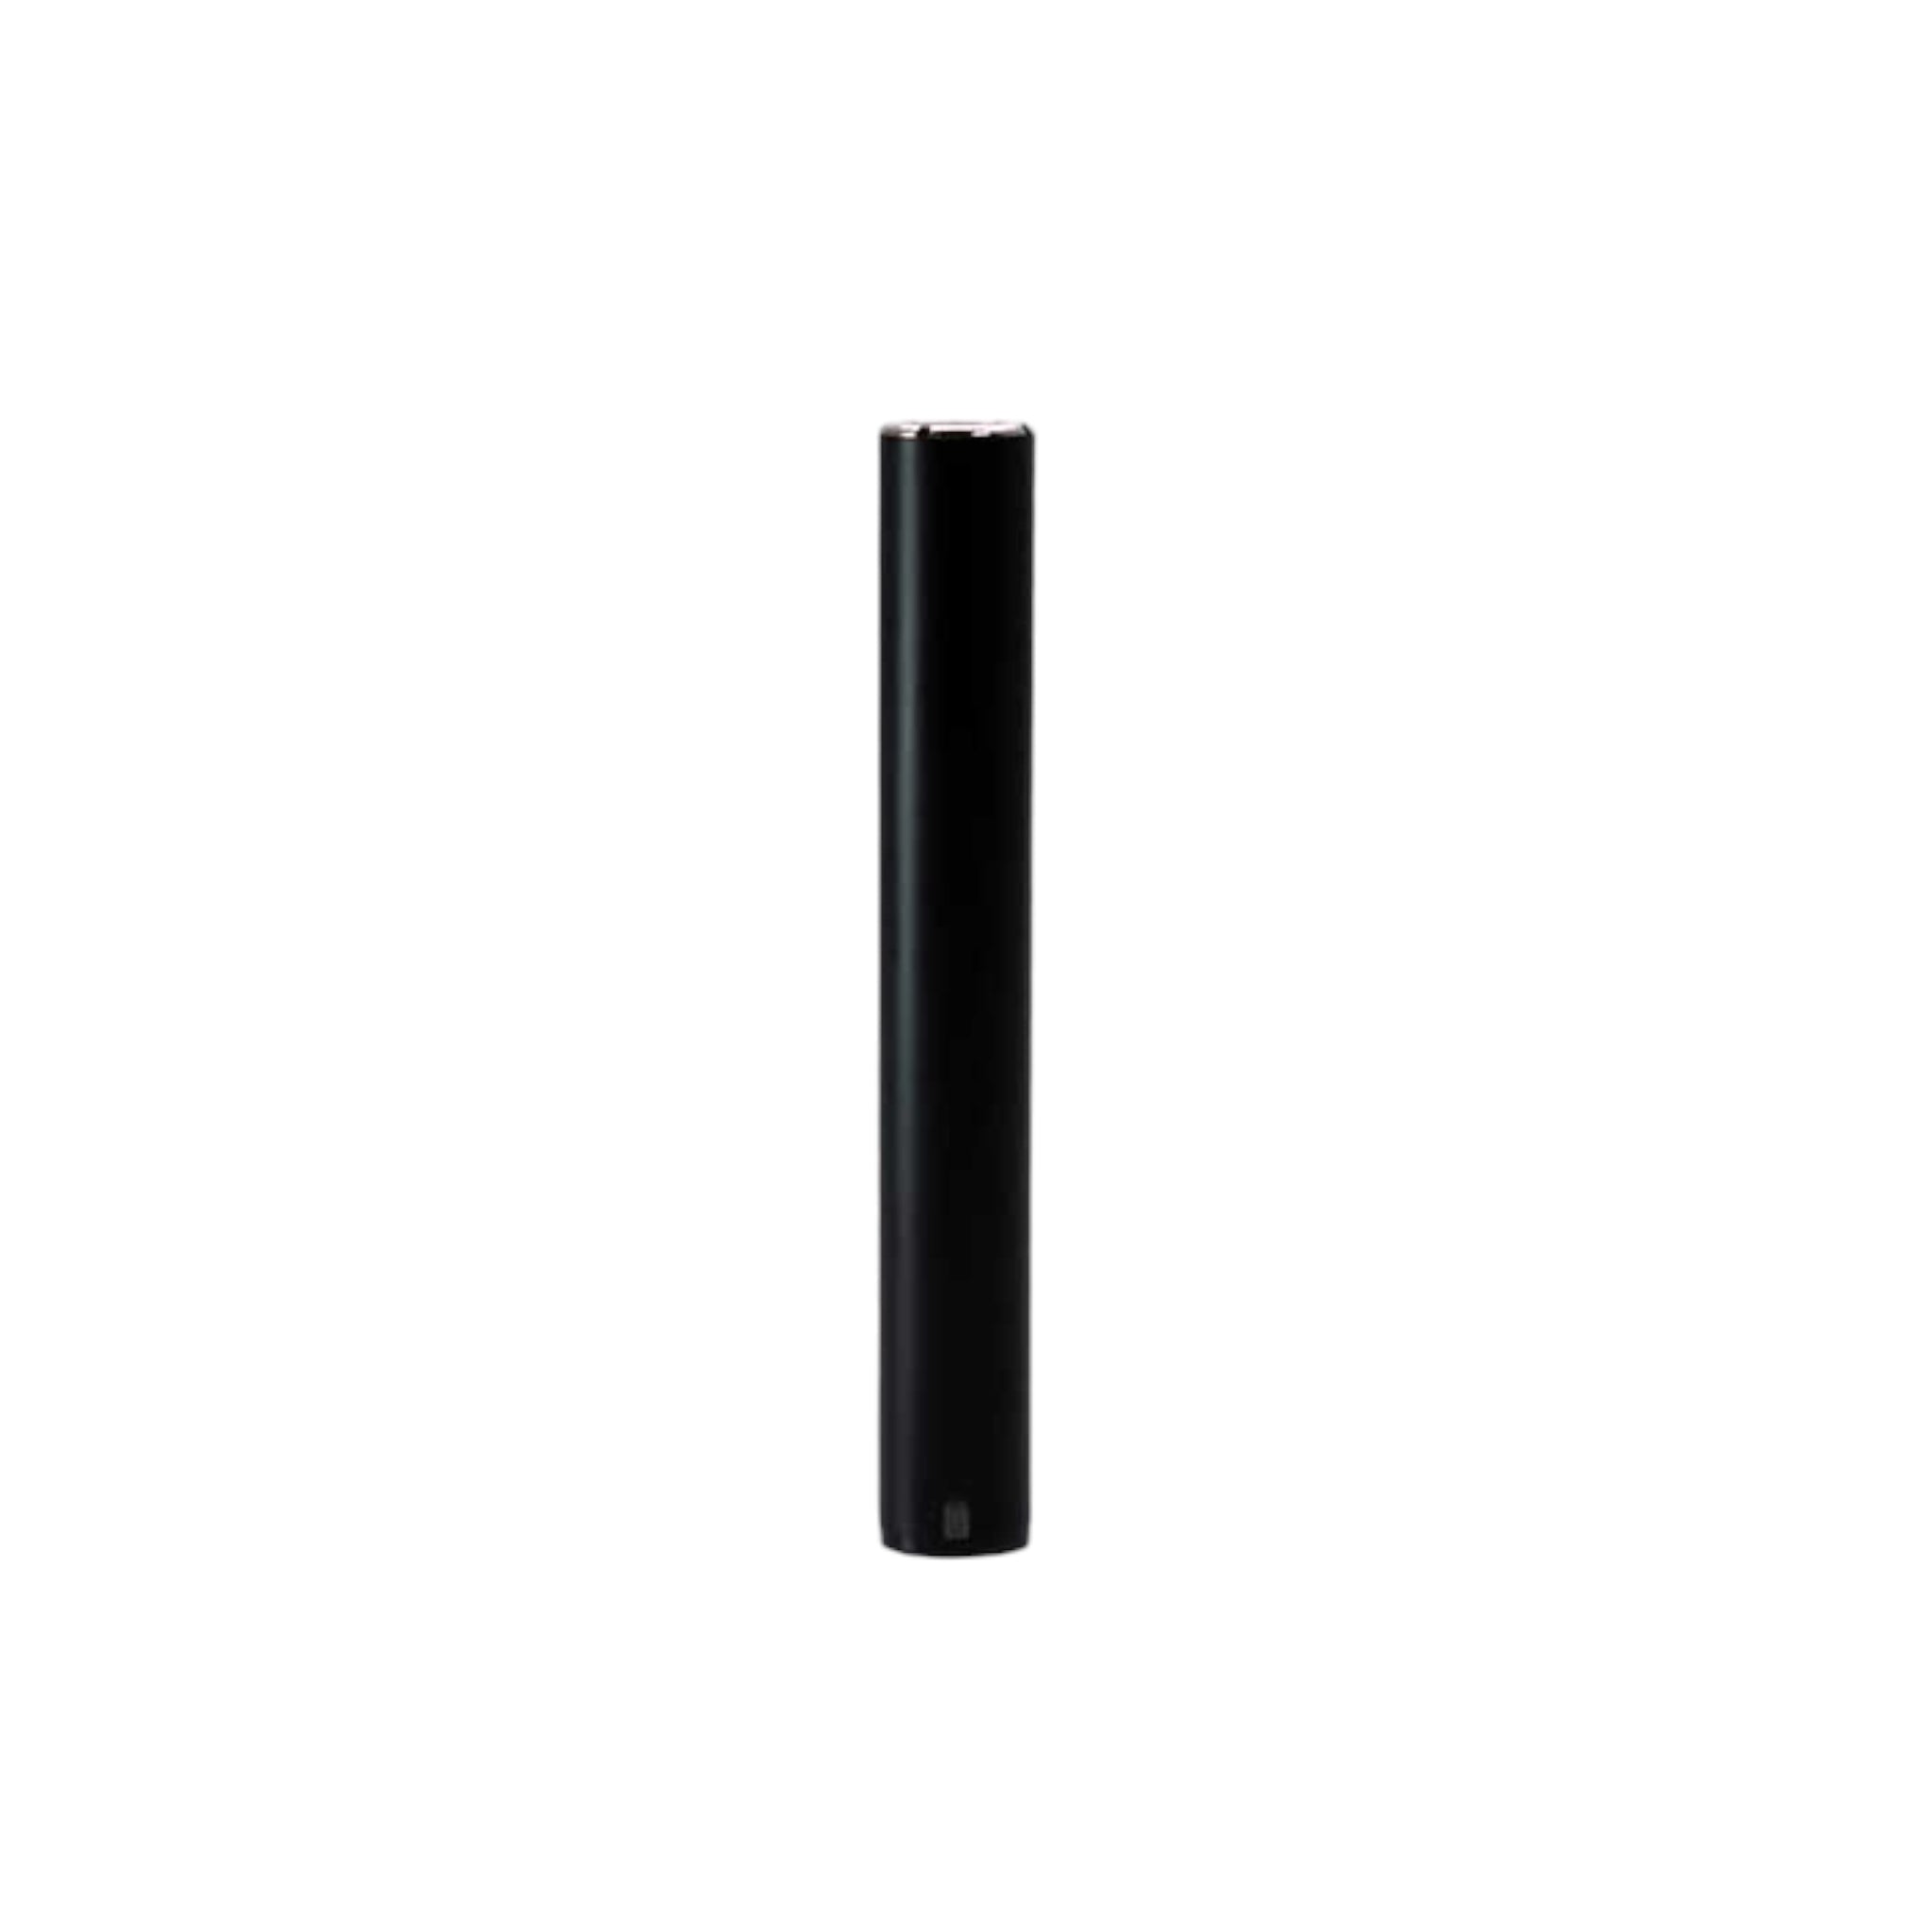 CCELL M3 Plus 510 Thread Battery - Black